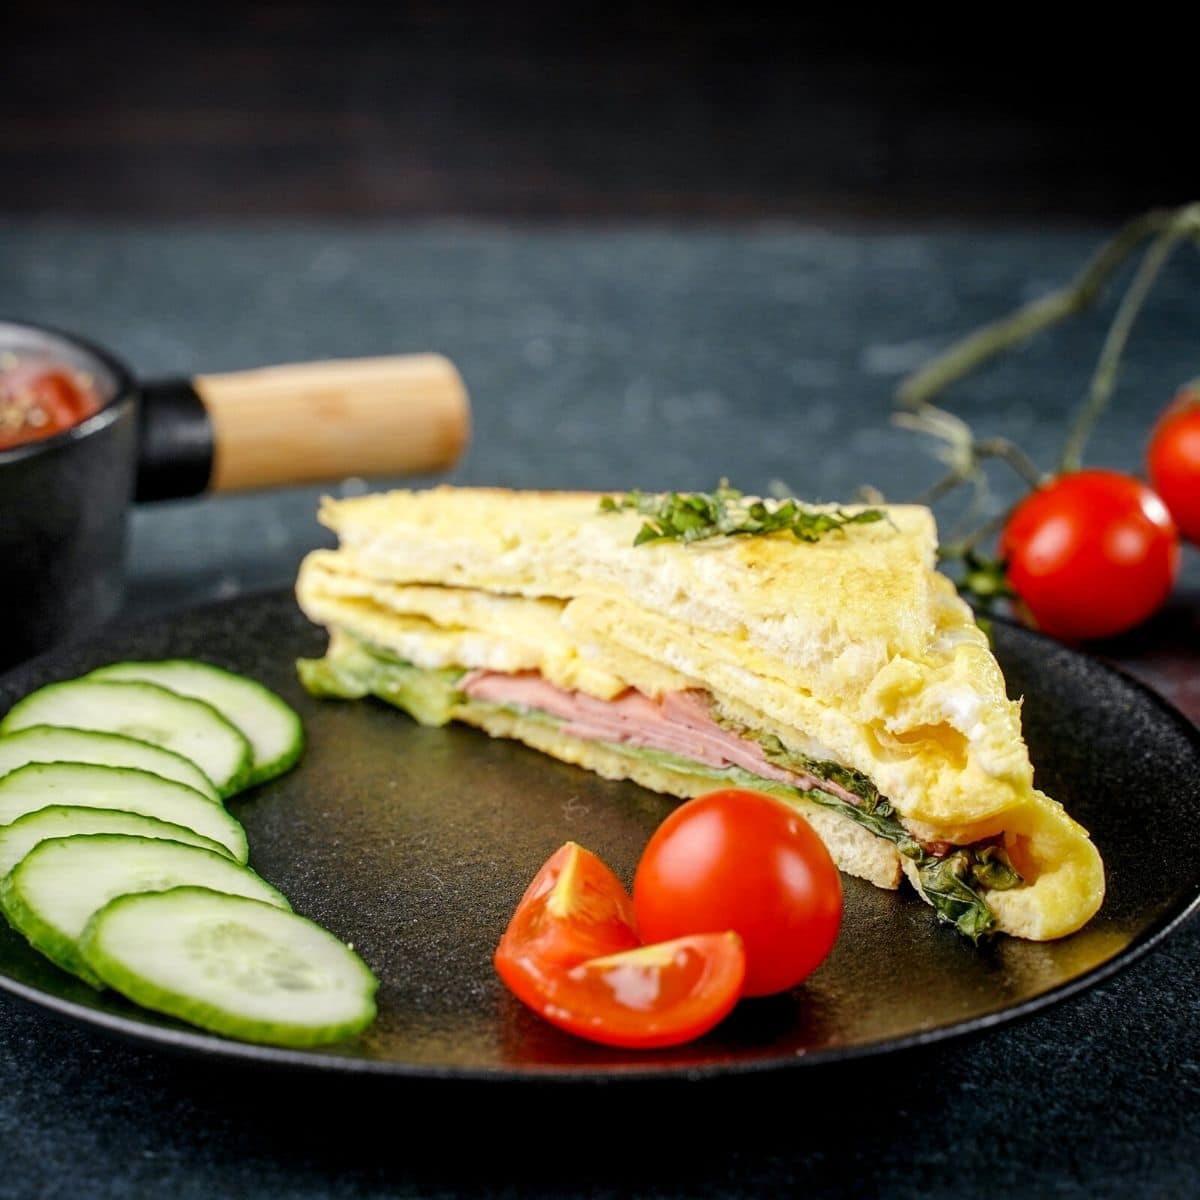 egg sandwich on black plate with tomato and cucumber